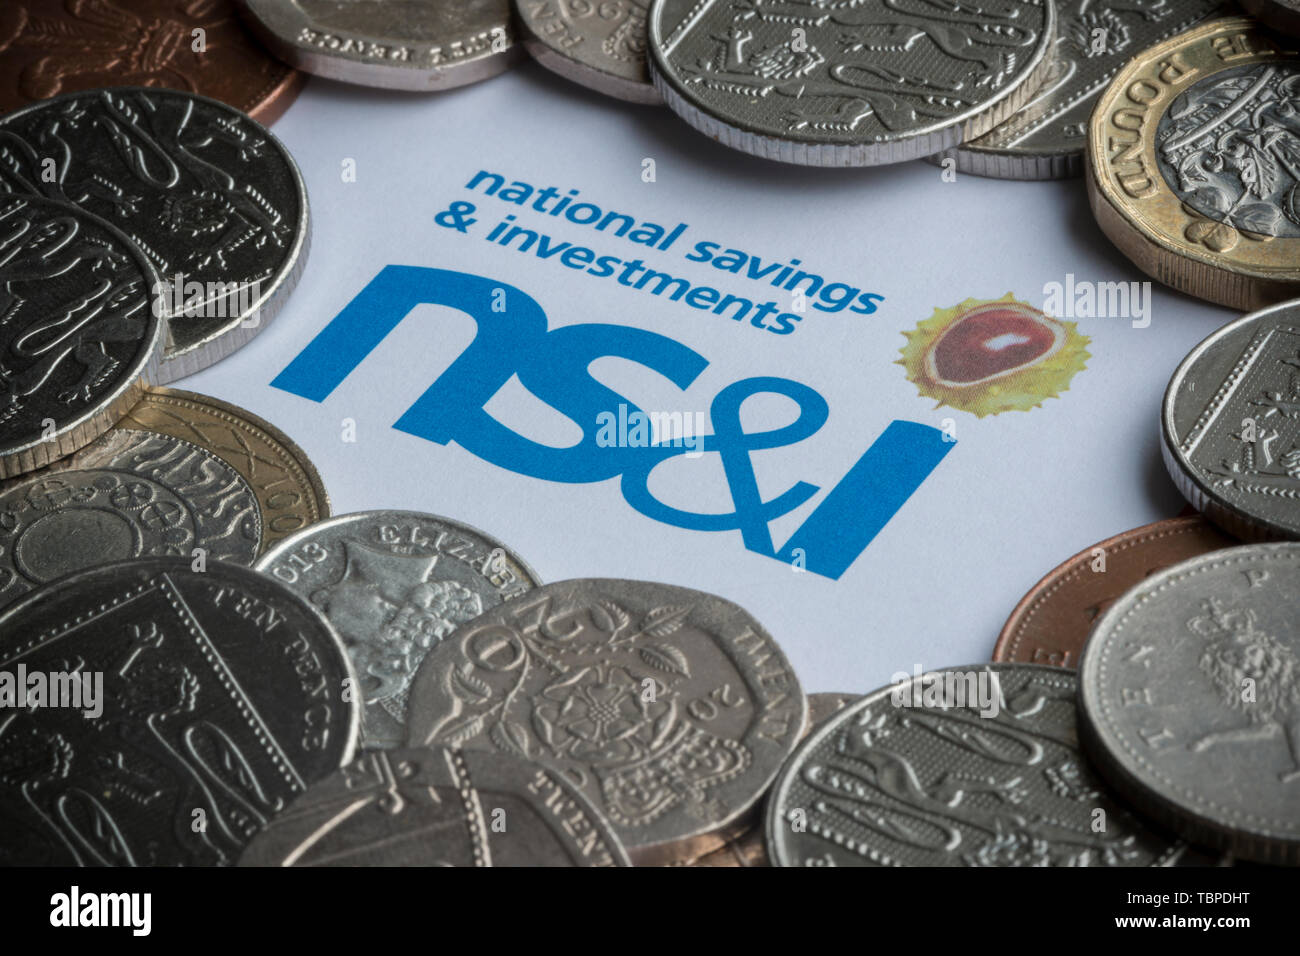 A form used to purchase NS&I Premium Bonds with the logo surrounded by coins. Stock Photo